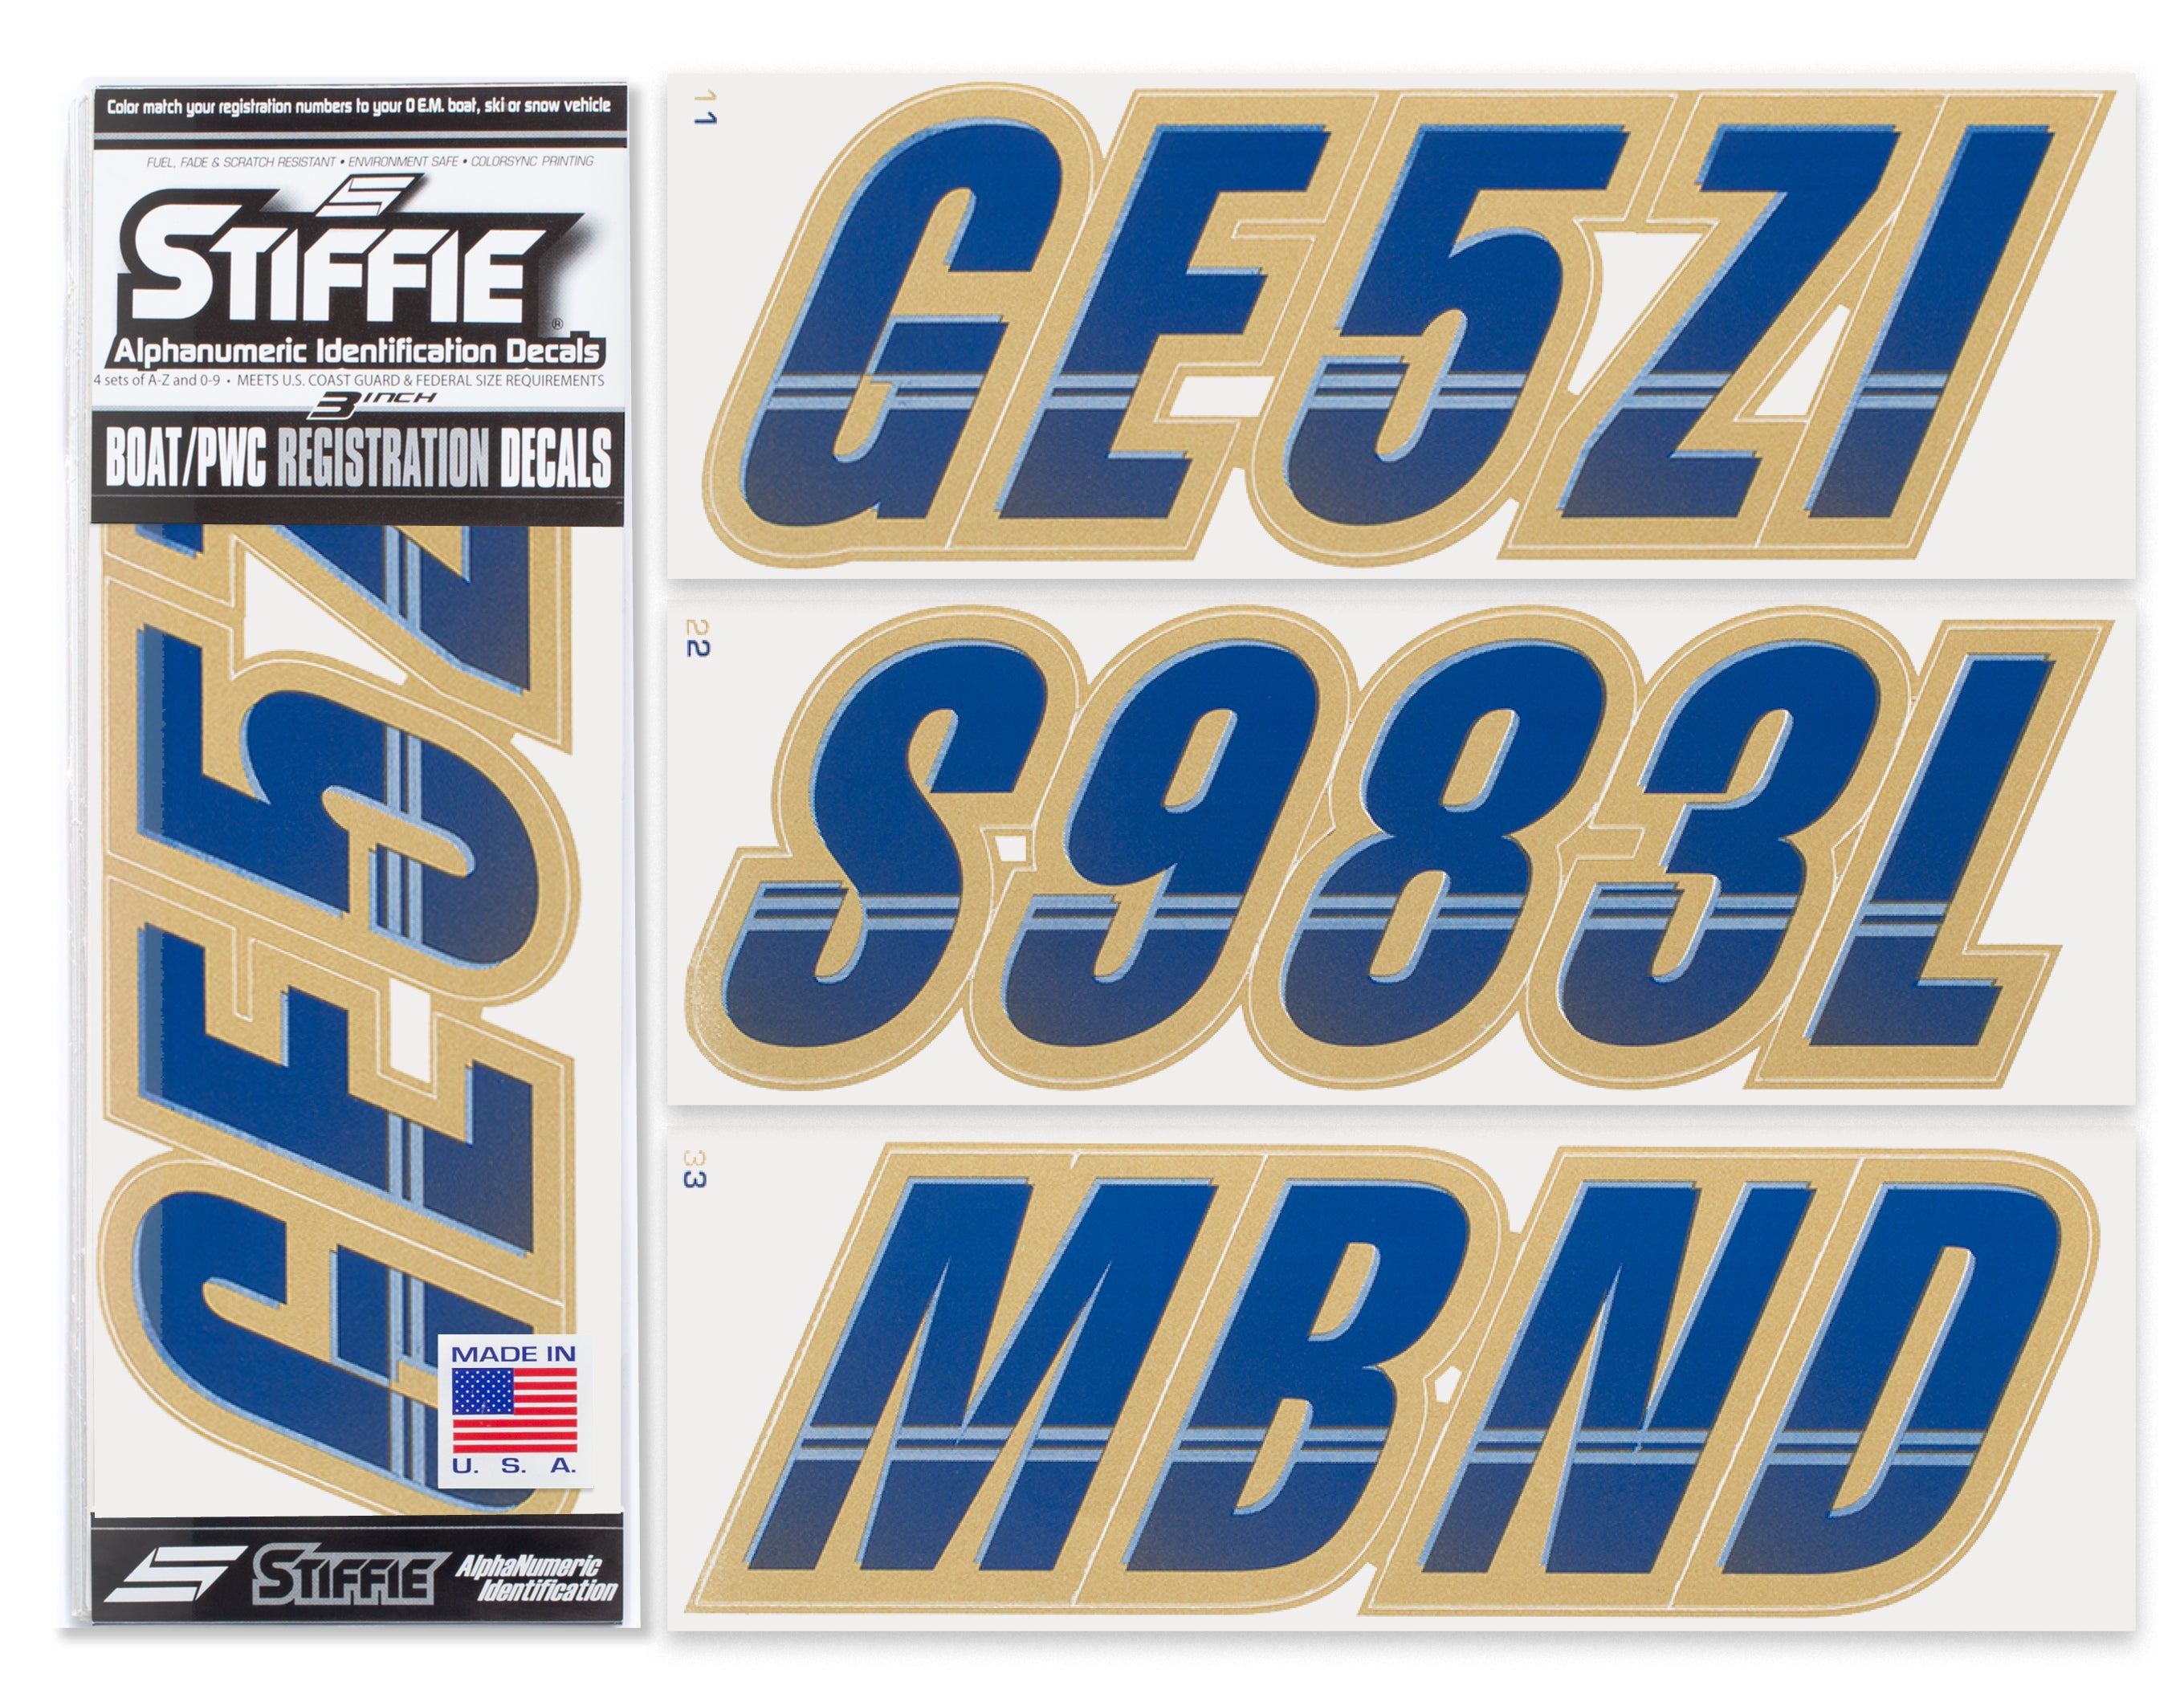 STIFFIE Techtron Navy/Gold 3" Alpha-Numeric Registration Identification Numbers Stickers Decals for Boats & Personal Watercraft